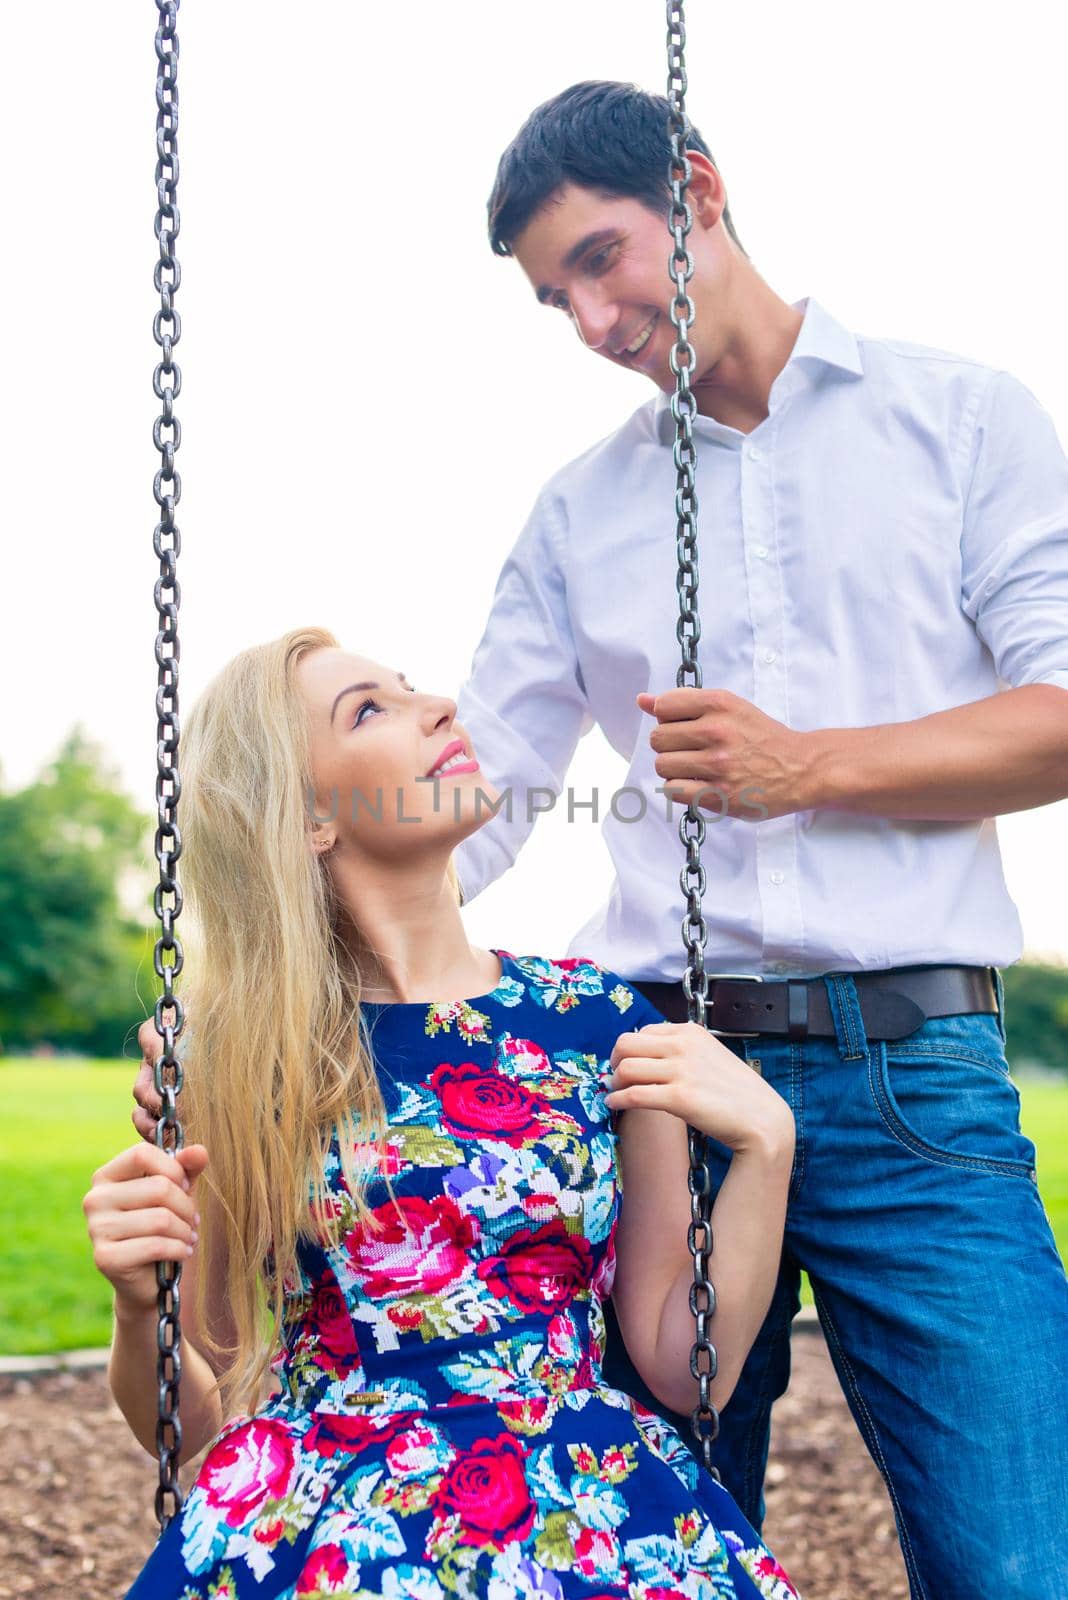 Man and woman on swing in park, couple in love by Kzenon